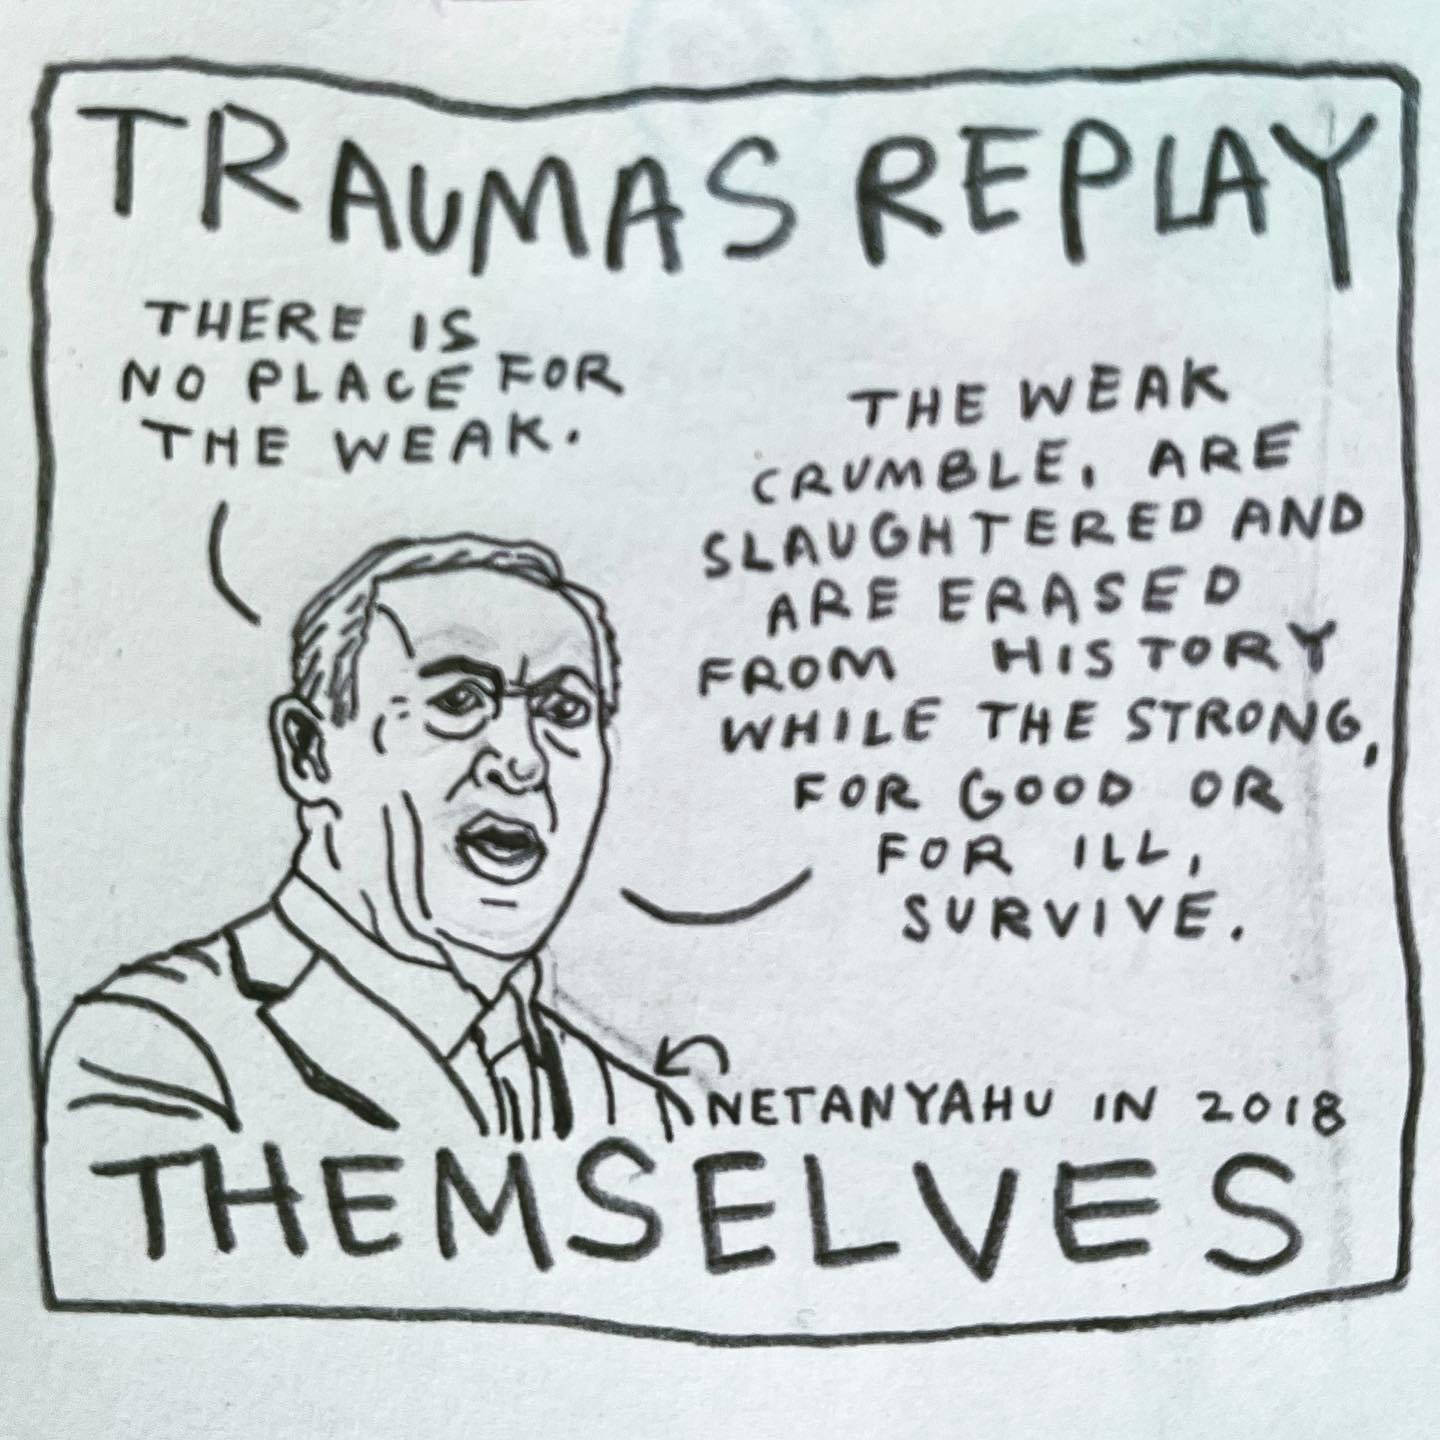 Panel 3: traumas replay themselves Image: A portrait of Netanyahu speaking, from the shoulders up, in suit and tie. An arrow pointing to him is labeled “Netanyahu in 2018.” He is saying, “There is no place for the weak. The weak crumble, are slaughtered and are erased from history while the strong, for good or for ill, survive.”